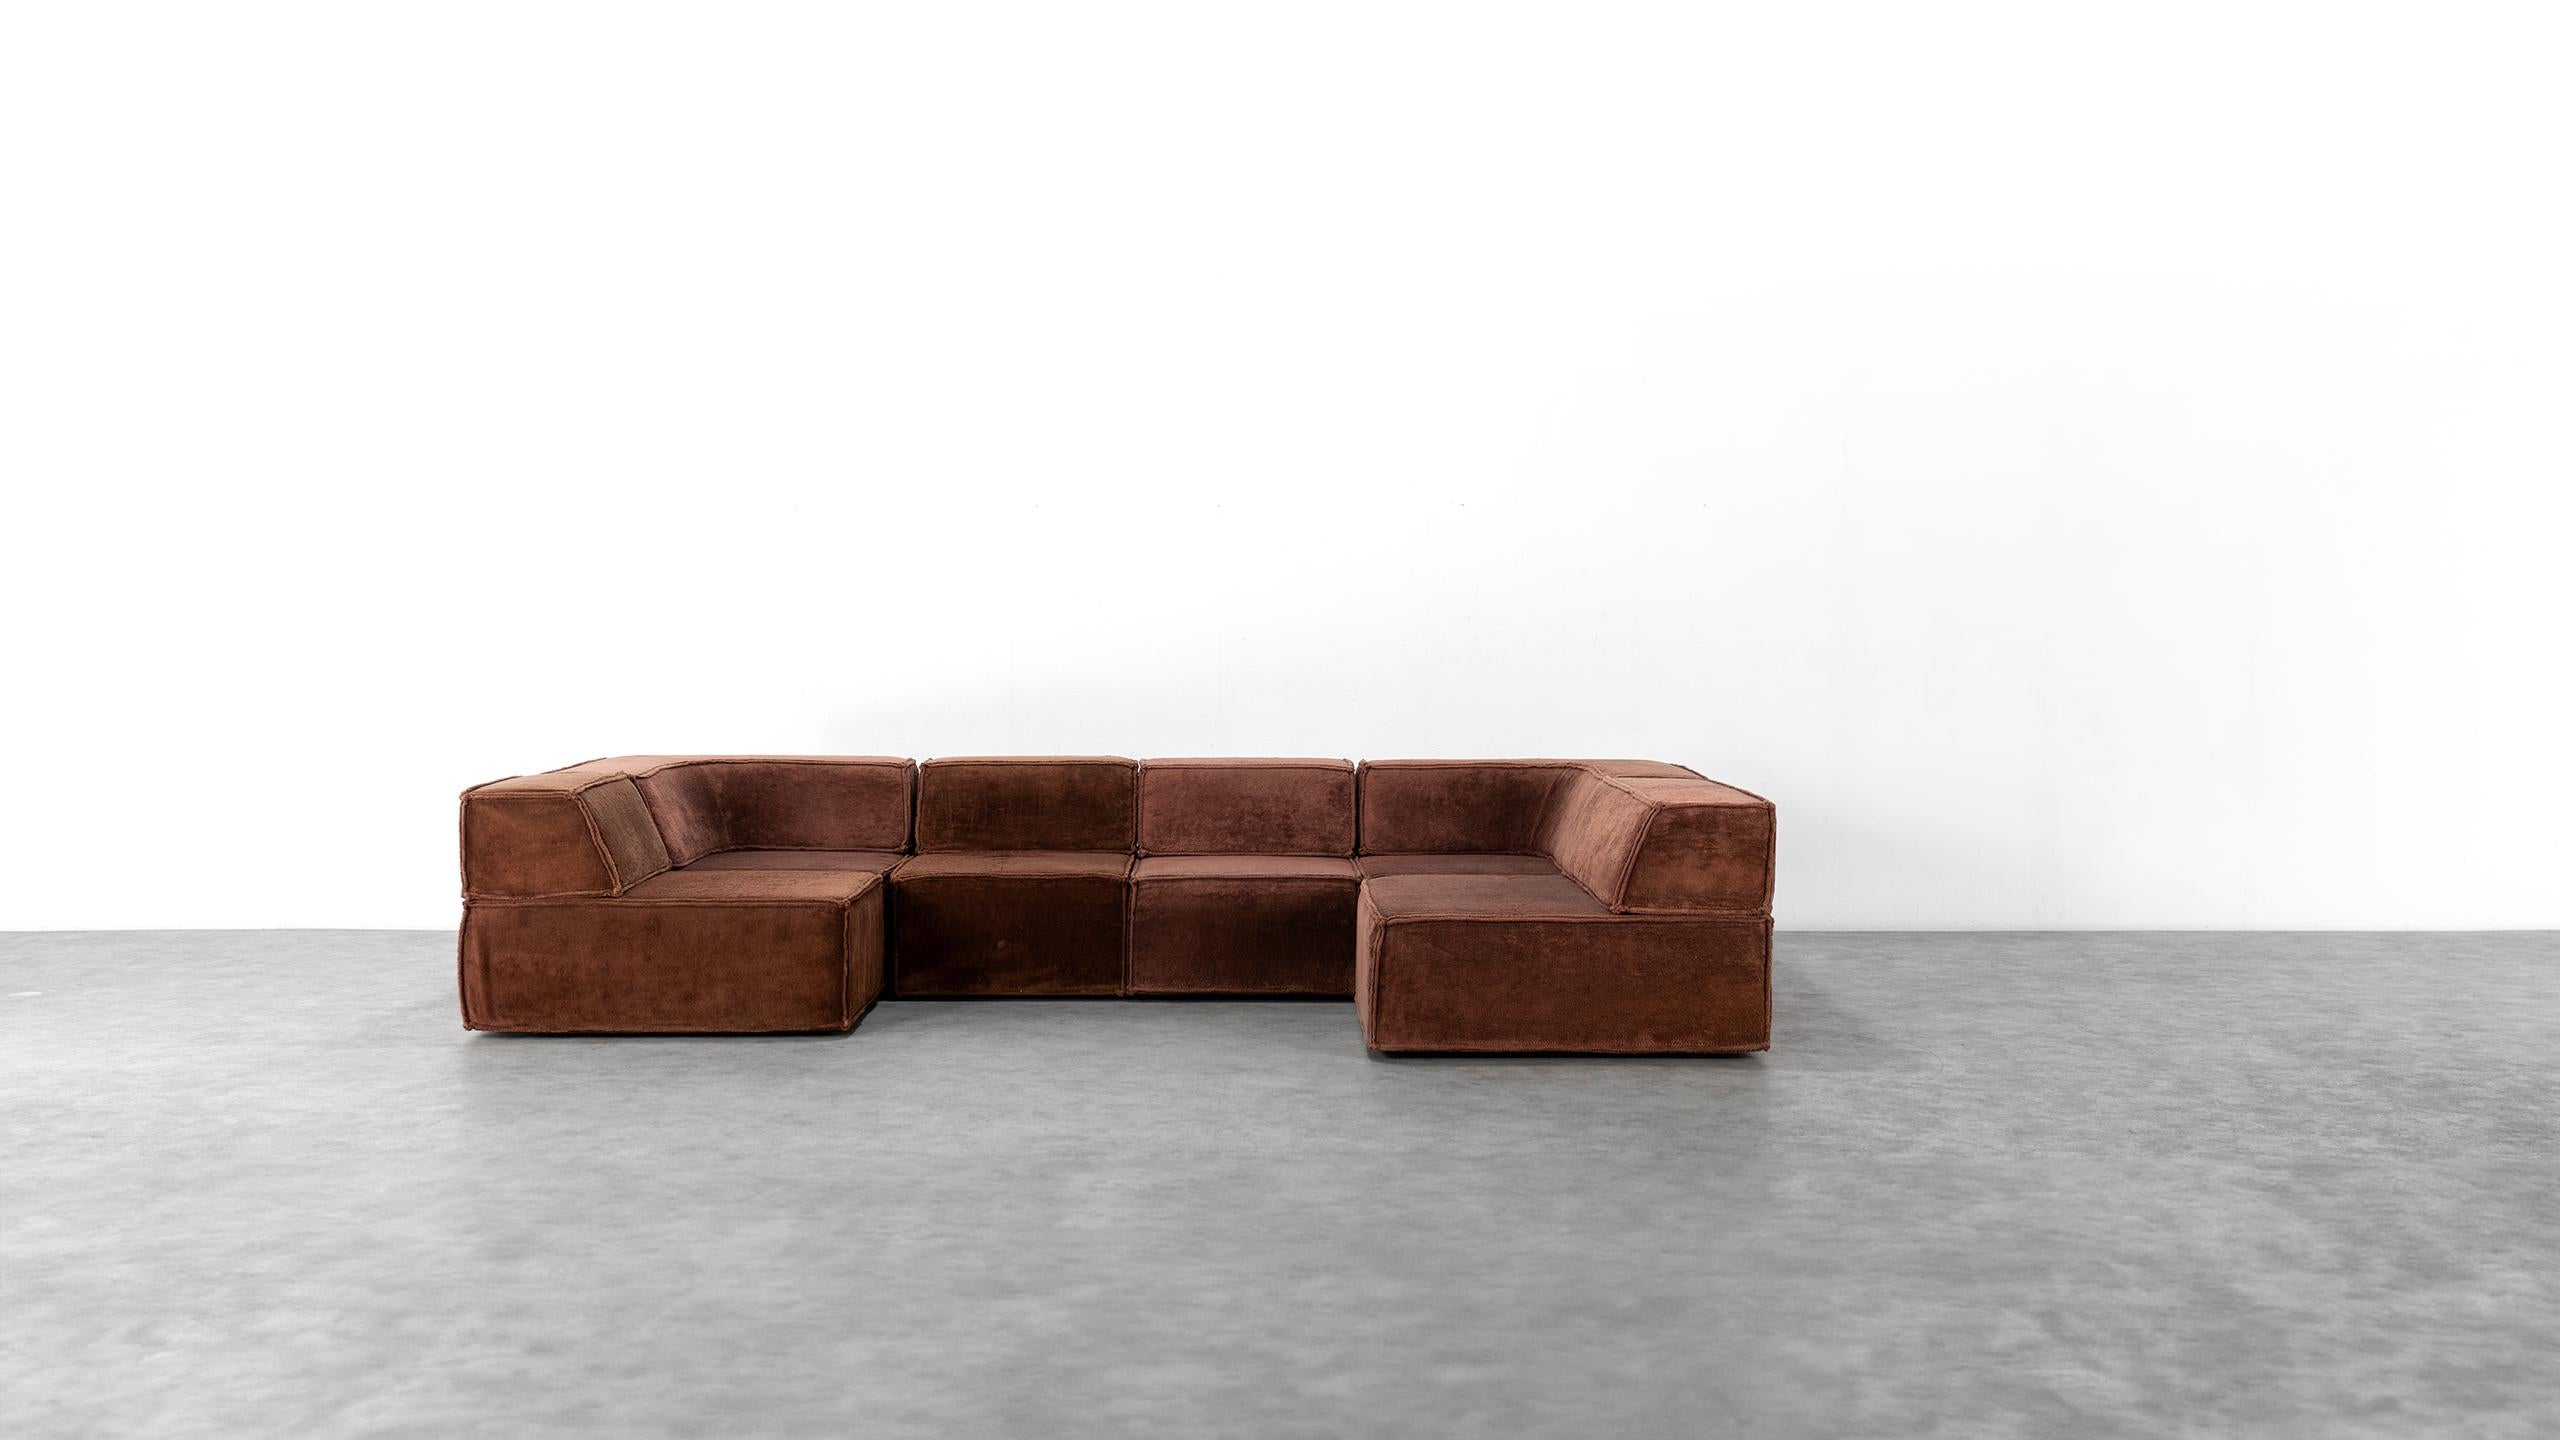 Late 20th Century Cor Trio Modular Sofa Giant Landscape Brown Chocolate 1972 by Team Form AG For Sale